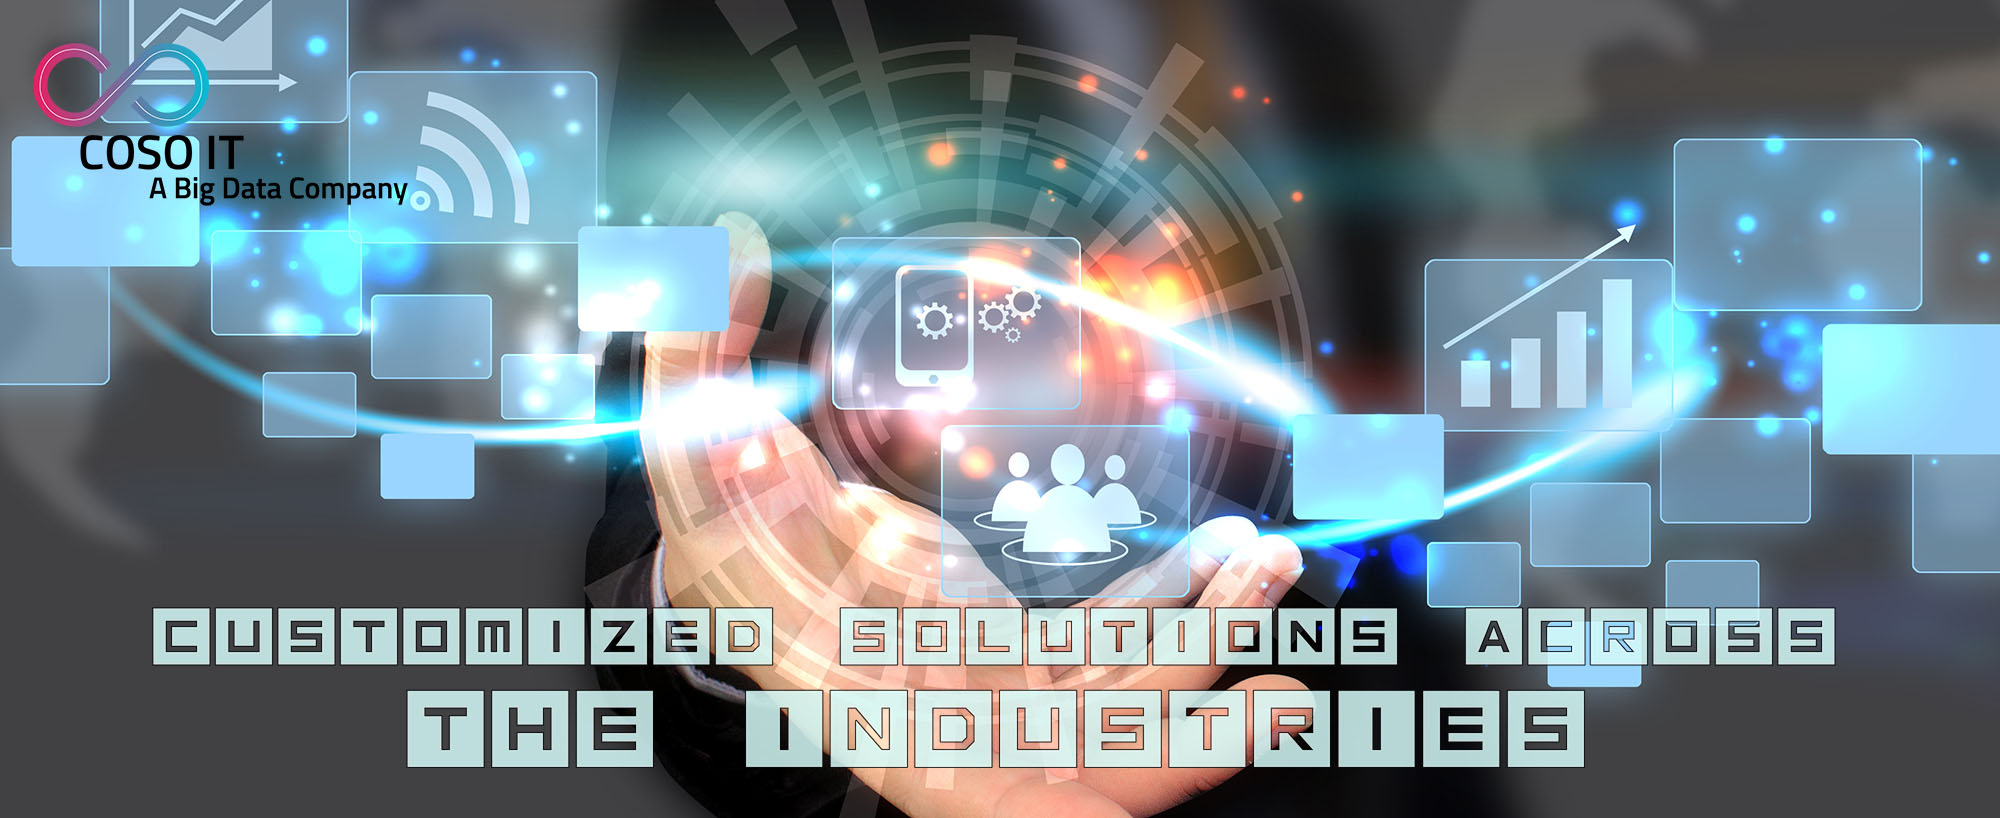 Big solutions for industries